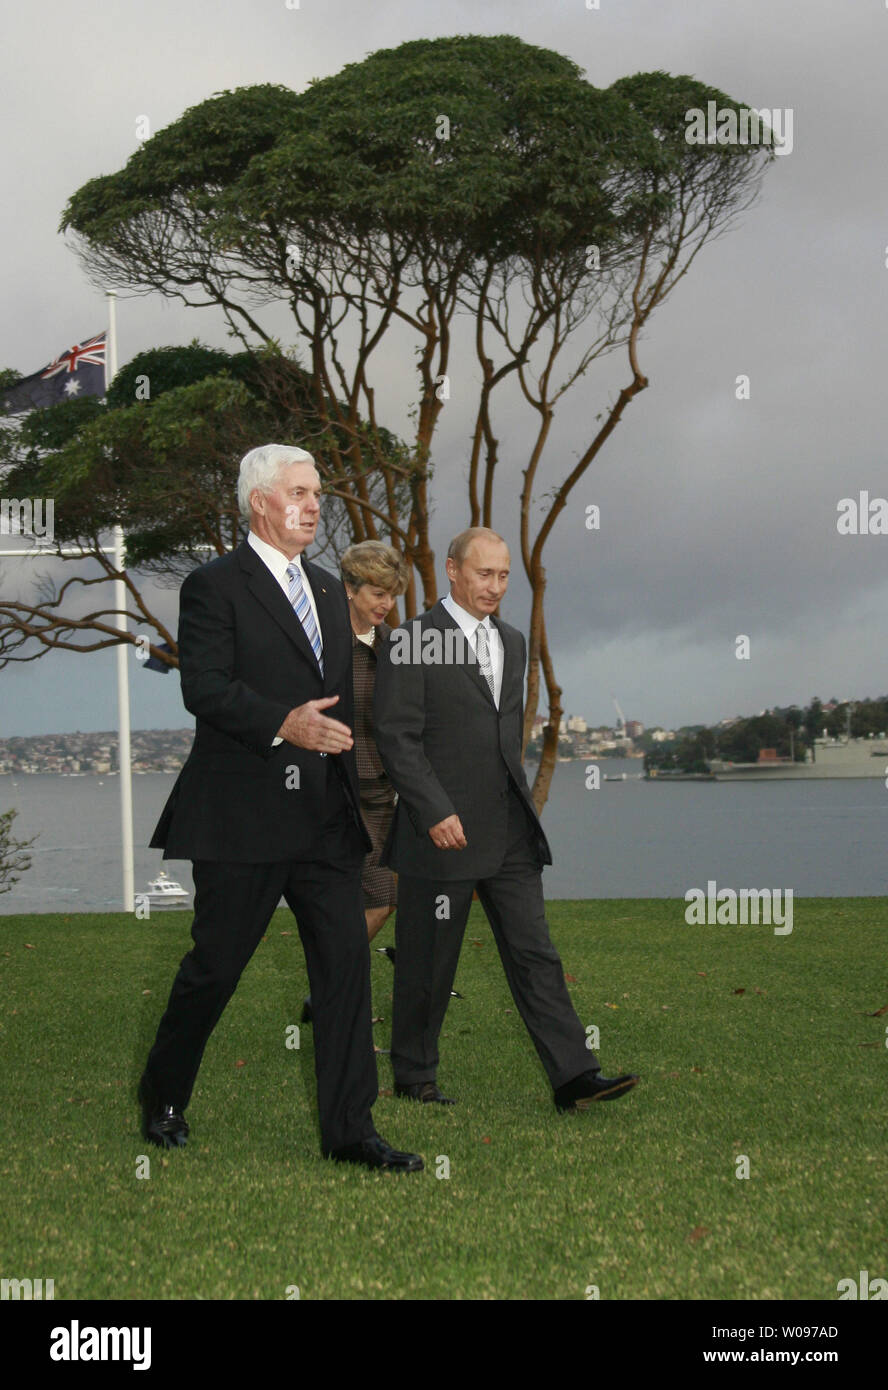 Russian President Vladimir Putin (R) with Australian Governor-General Michael Jeffery (L) and wife Marlena walk during a courtesy call at the Admiralty House in Sydney in Sydney on September 7, 2007. Putin is attending the Asia-Pacific Economic Cooperation (APEC) summit. (UPI Photo/Anatoli Zhdanov) Stock Photo